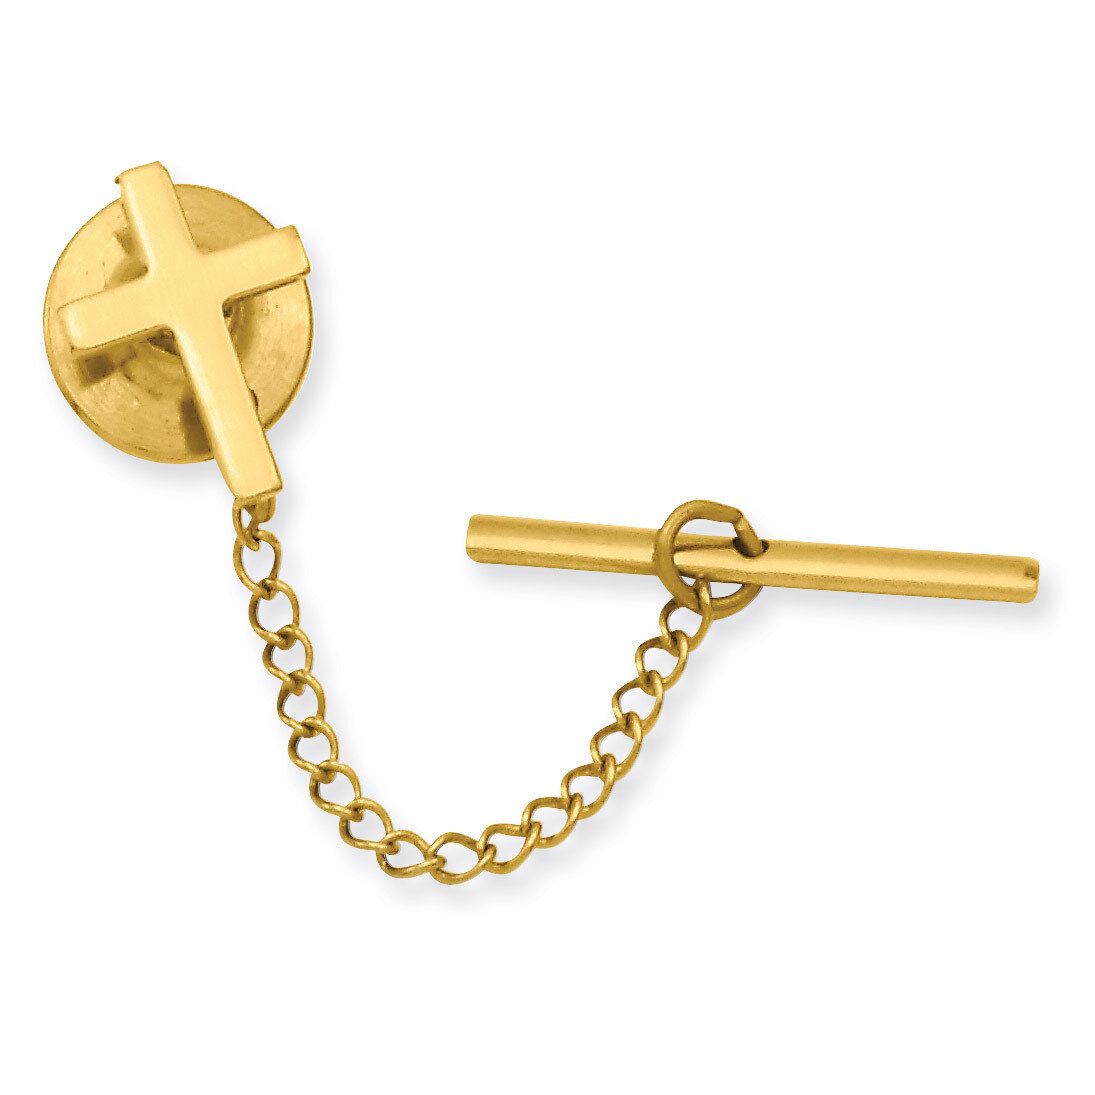 Kelly Waters Small Plain Cross Tie Tack Gold-plated KW565